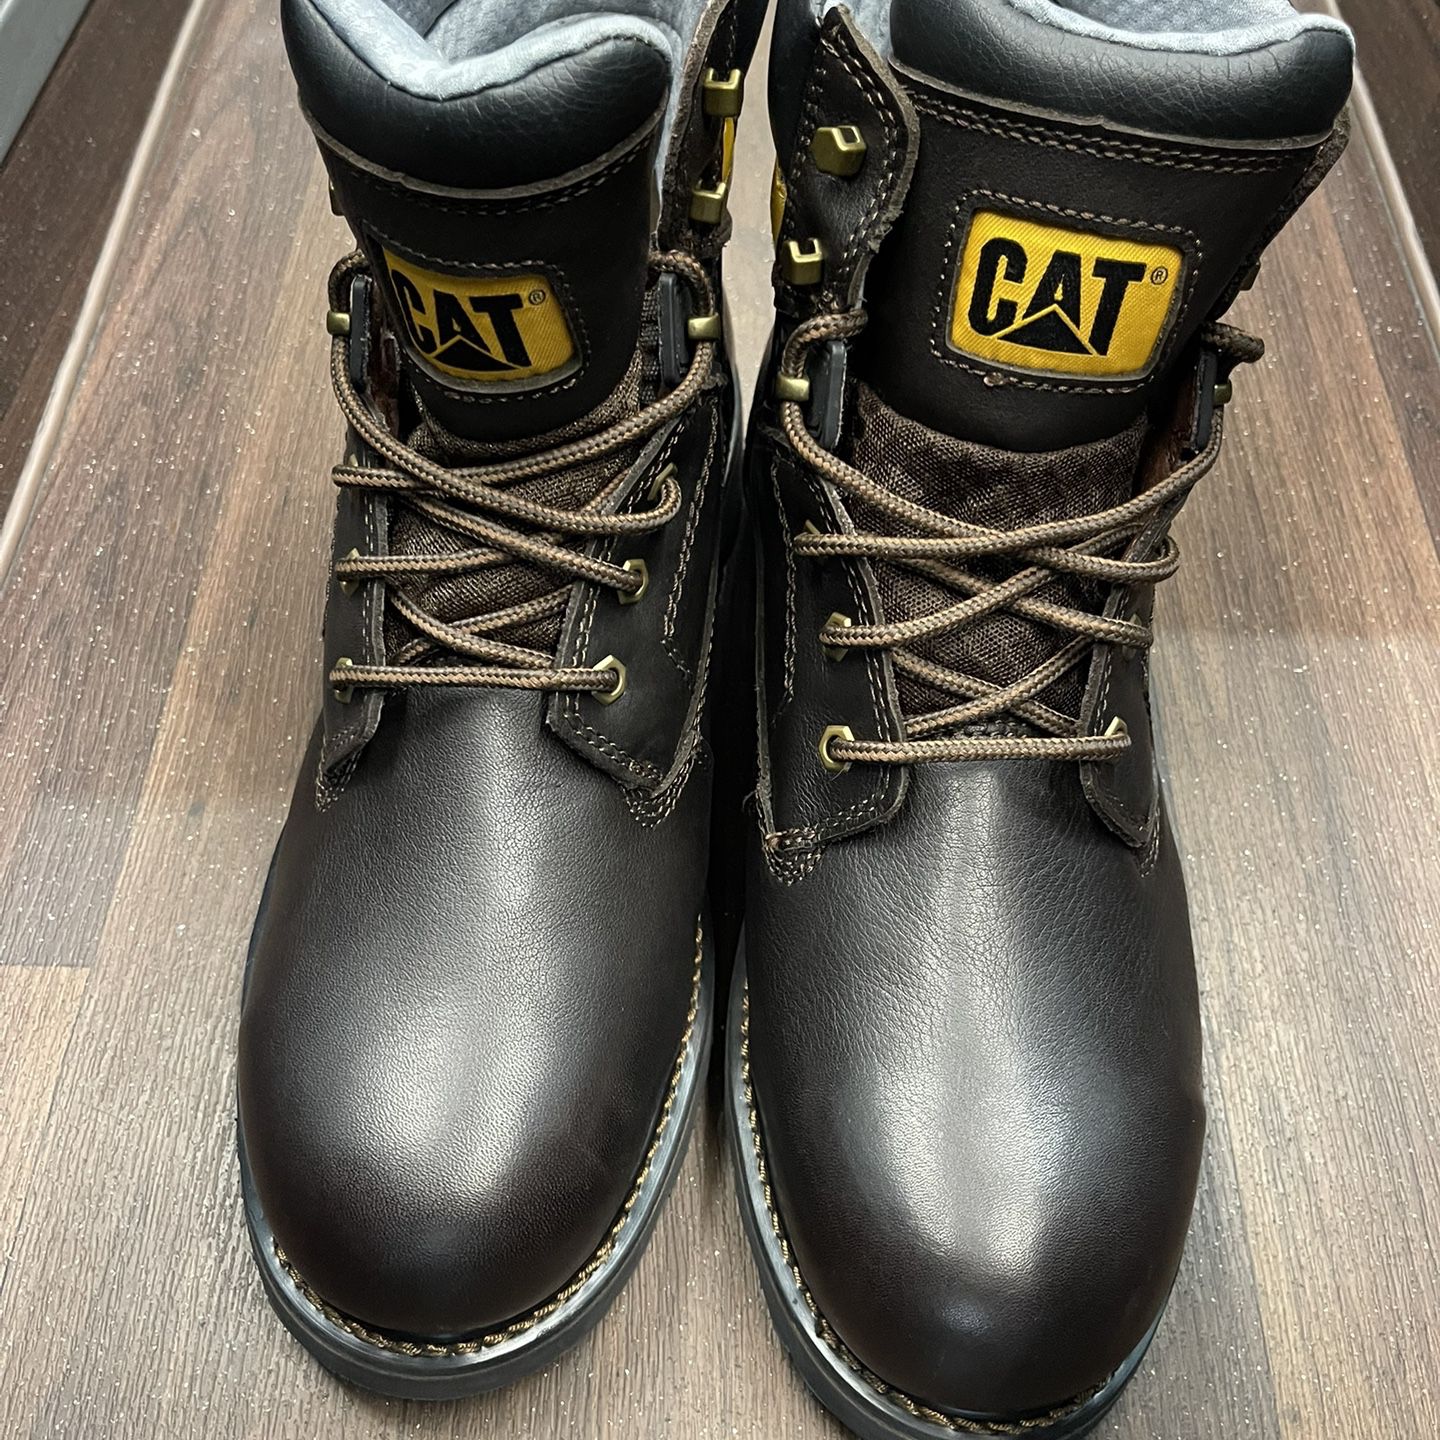 Caterpillar, steel toe, leather boots, new size 13